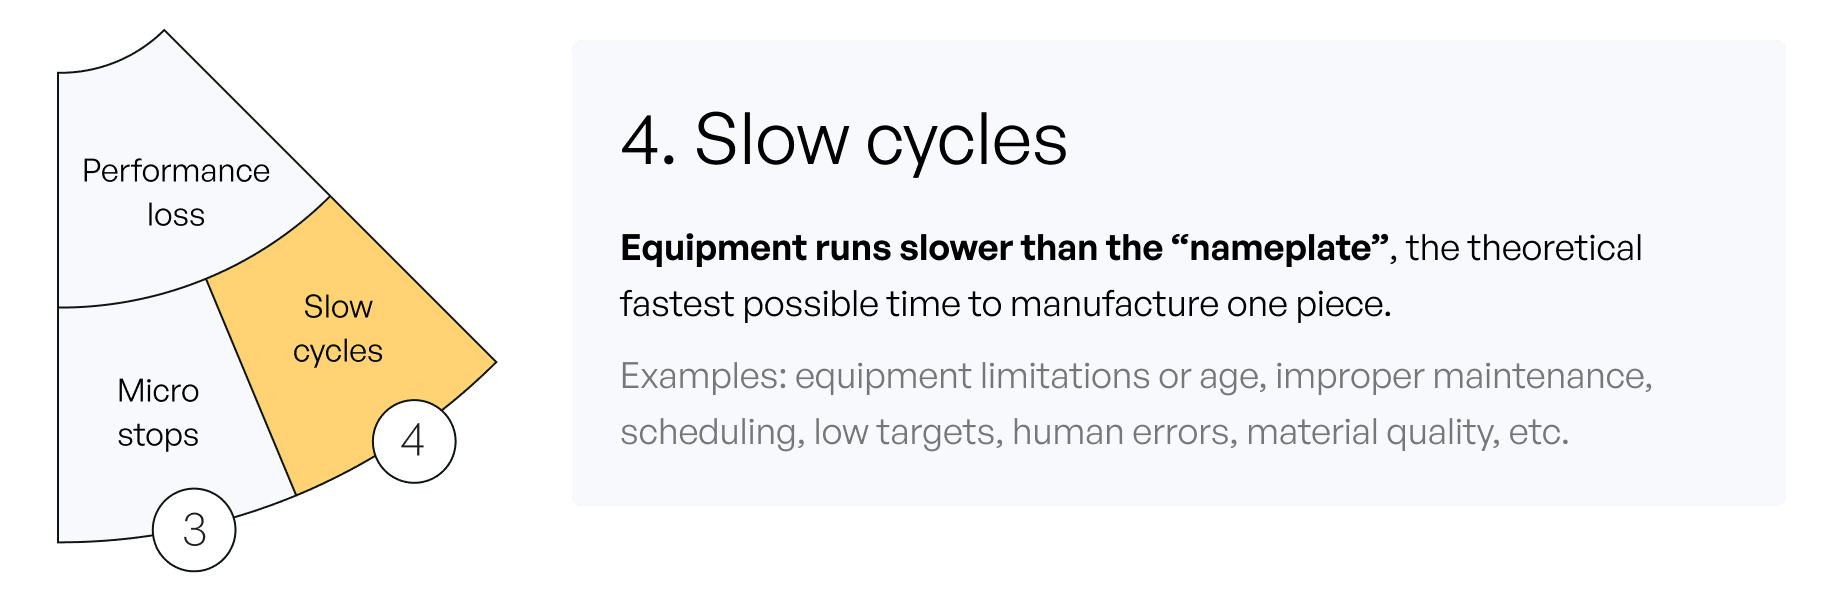 slow cycles are when equipment runs slower than theoretical fastest time